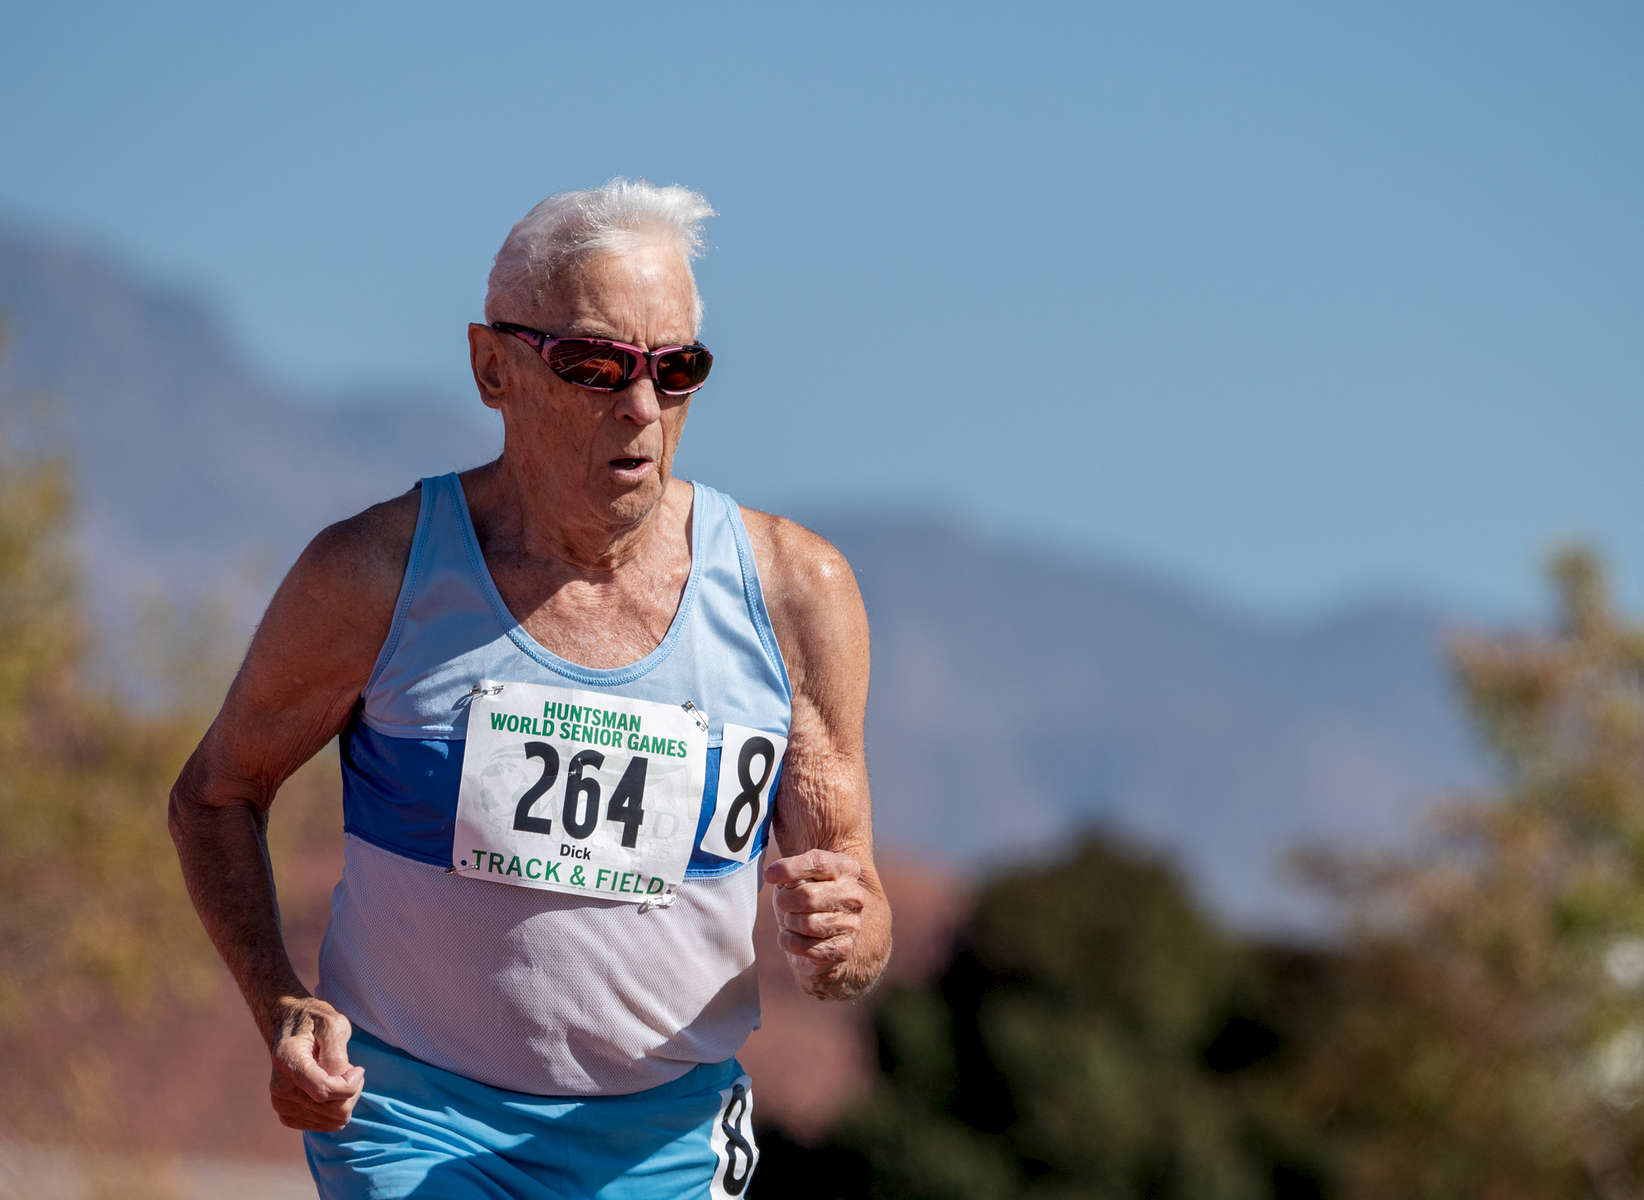 Senior athlete Dick Graves aged ninety competes in the 800m run during the Huntsman World Senior Games on October 15, 2019 in St. George, Utah. 